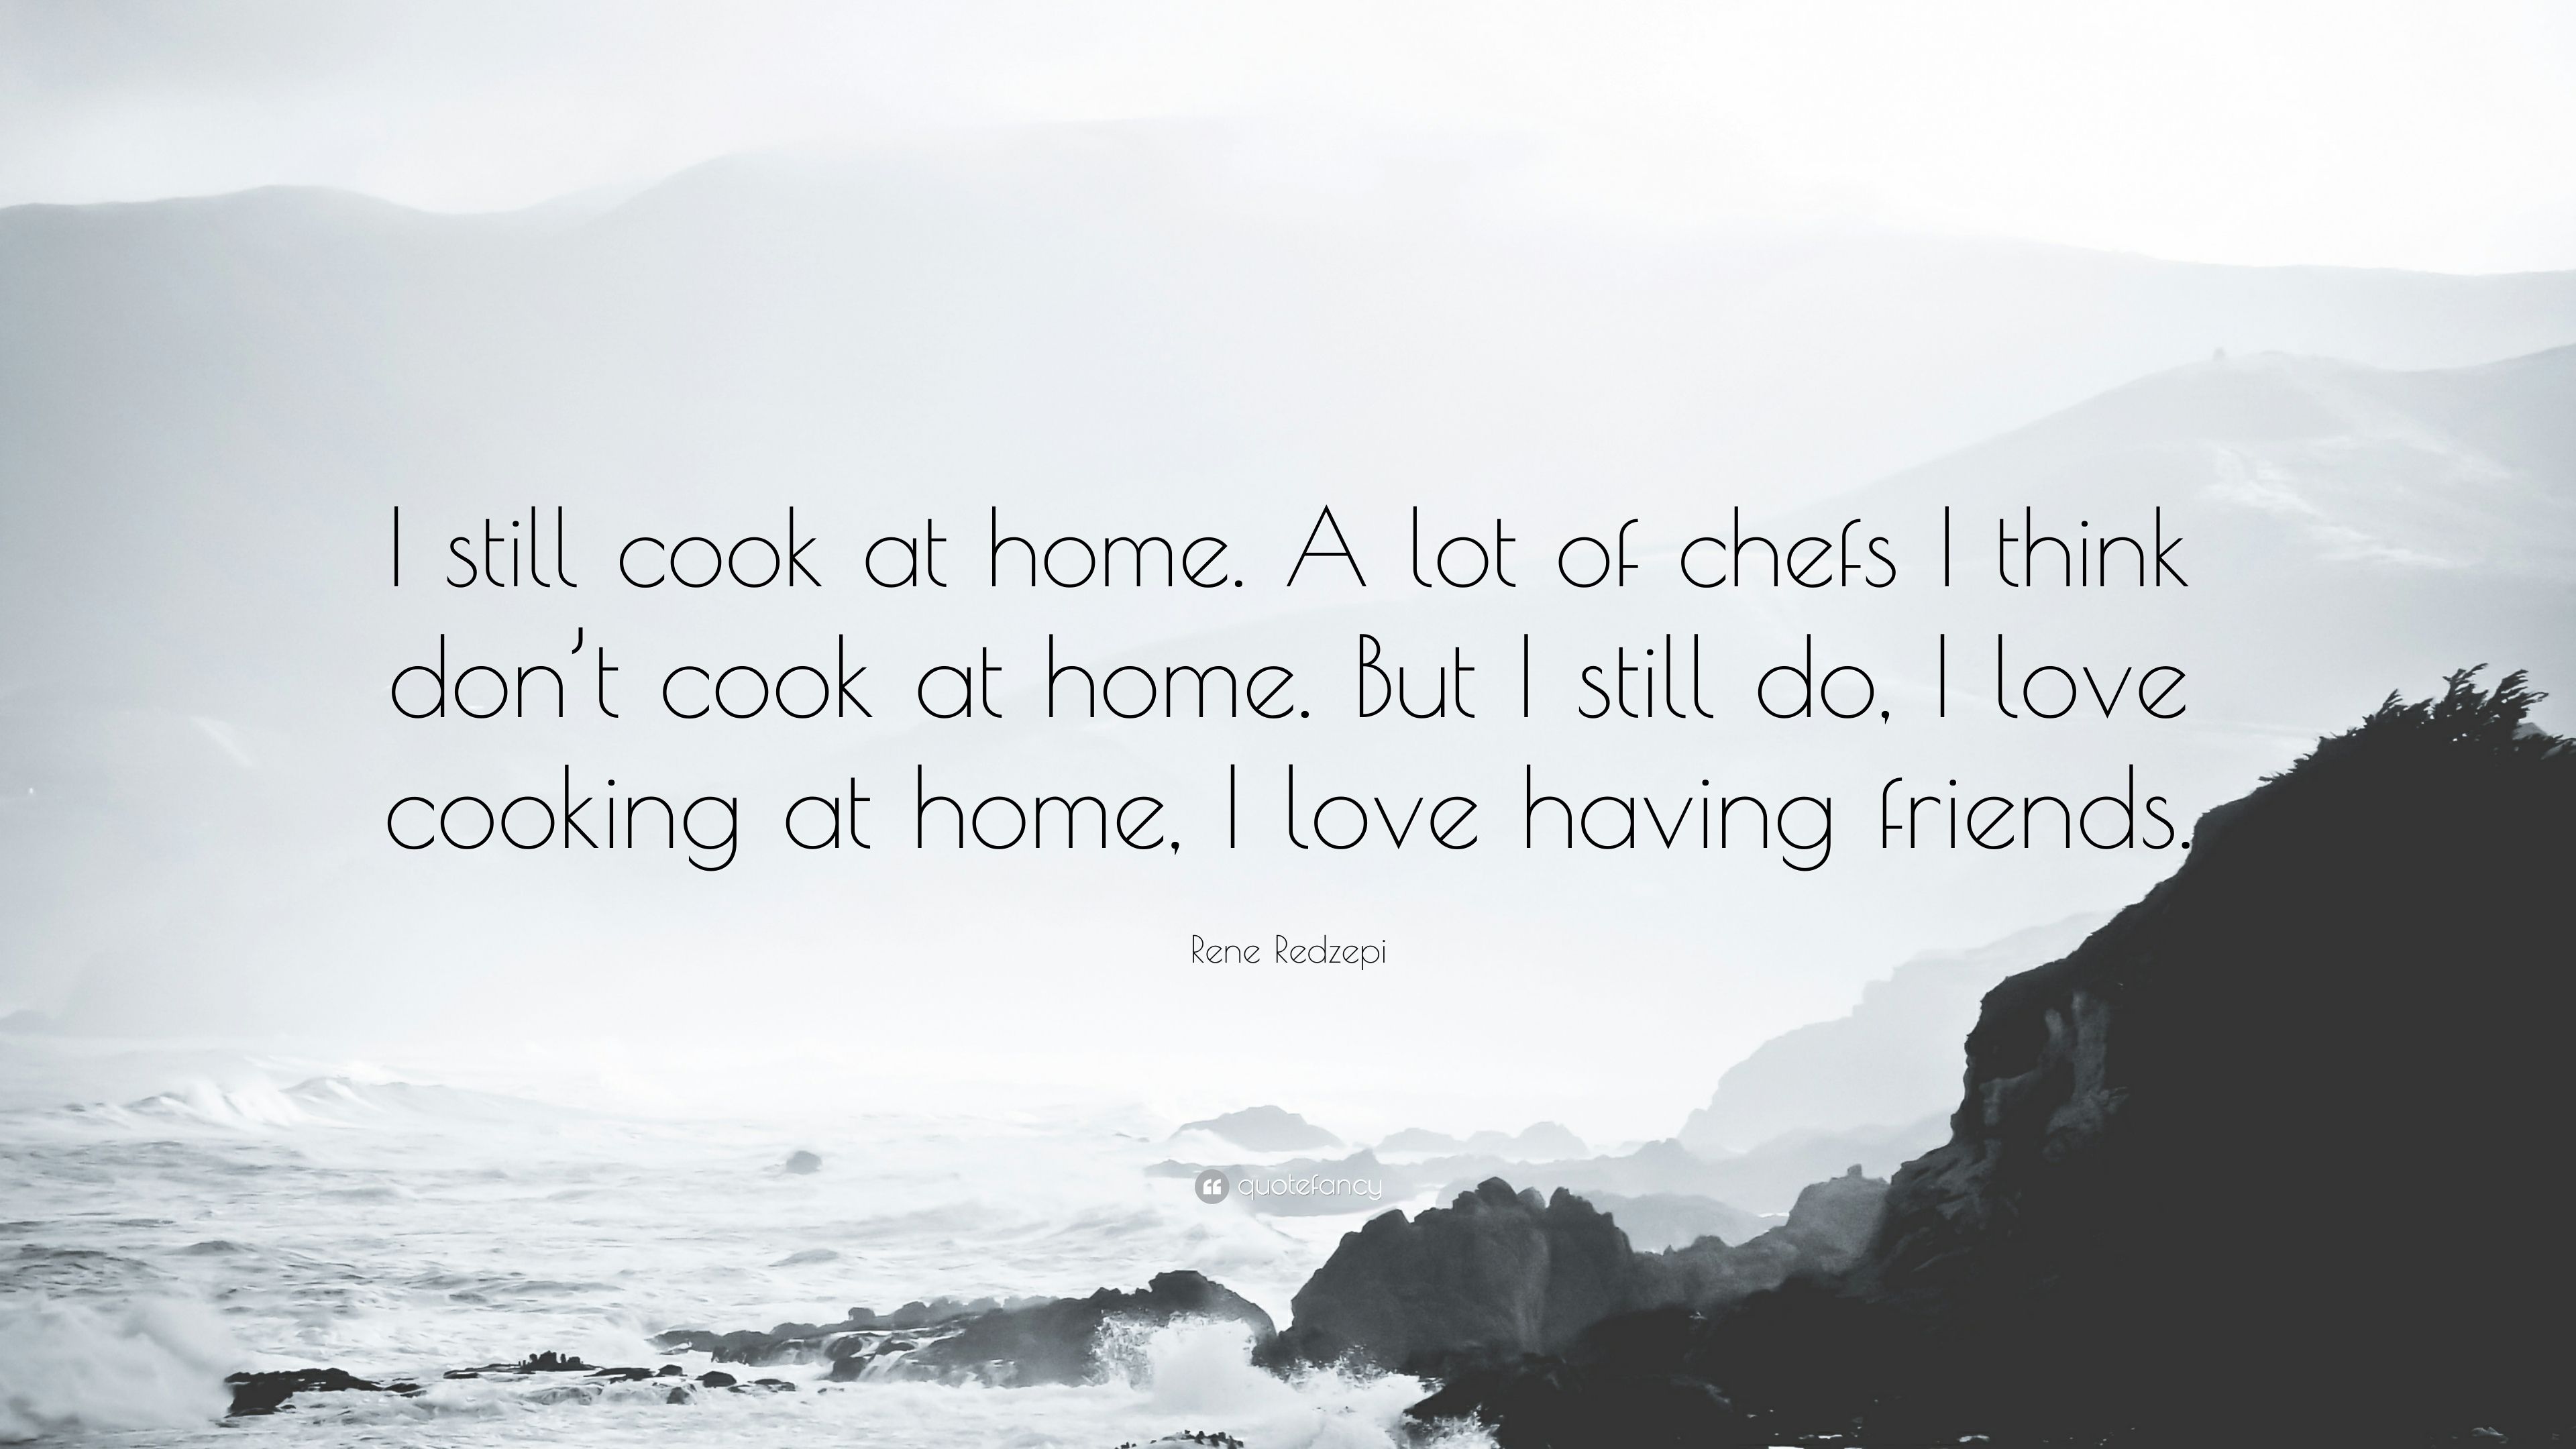 Rene Redzepi Quote: “I still cook at home. A lot of chefs I think